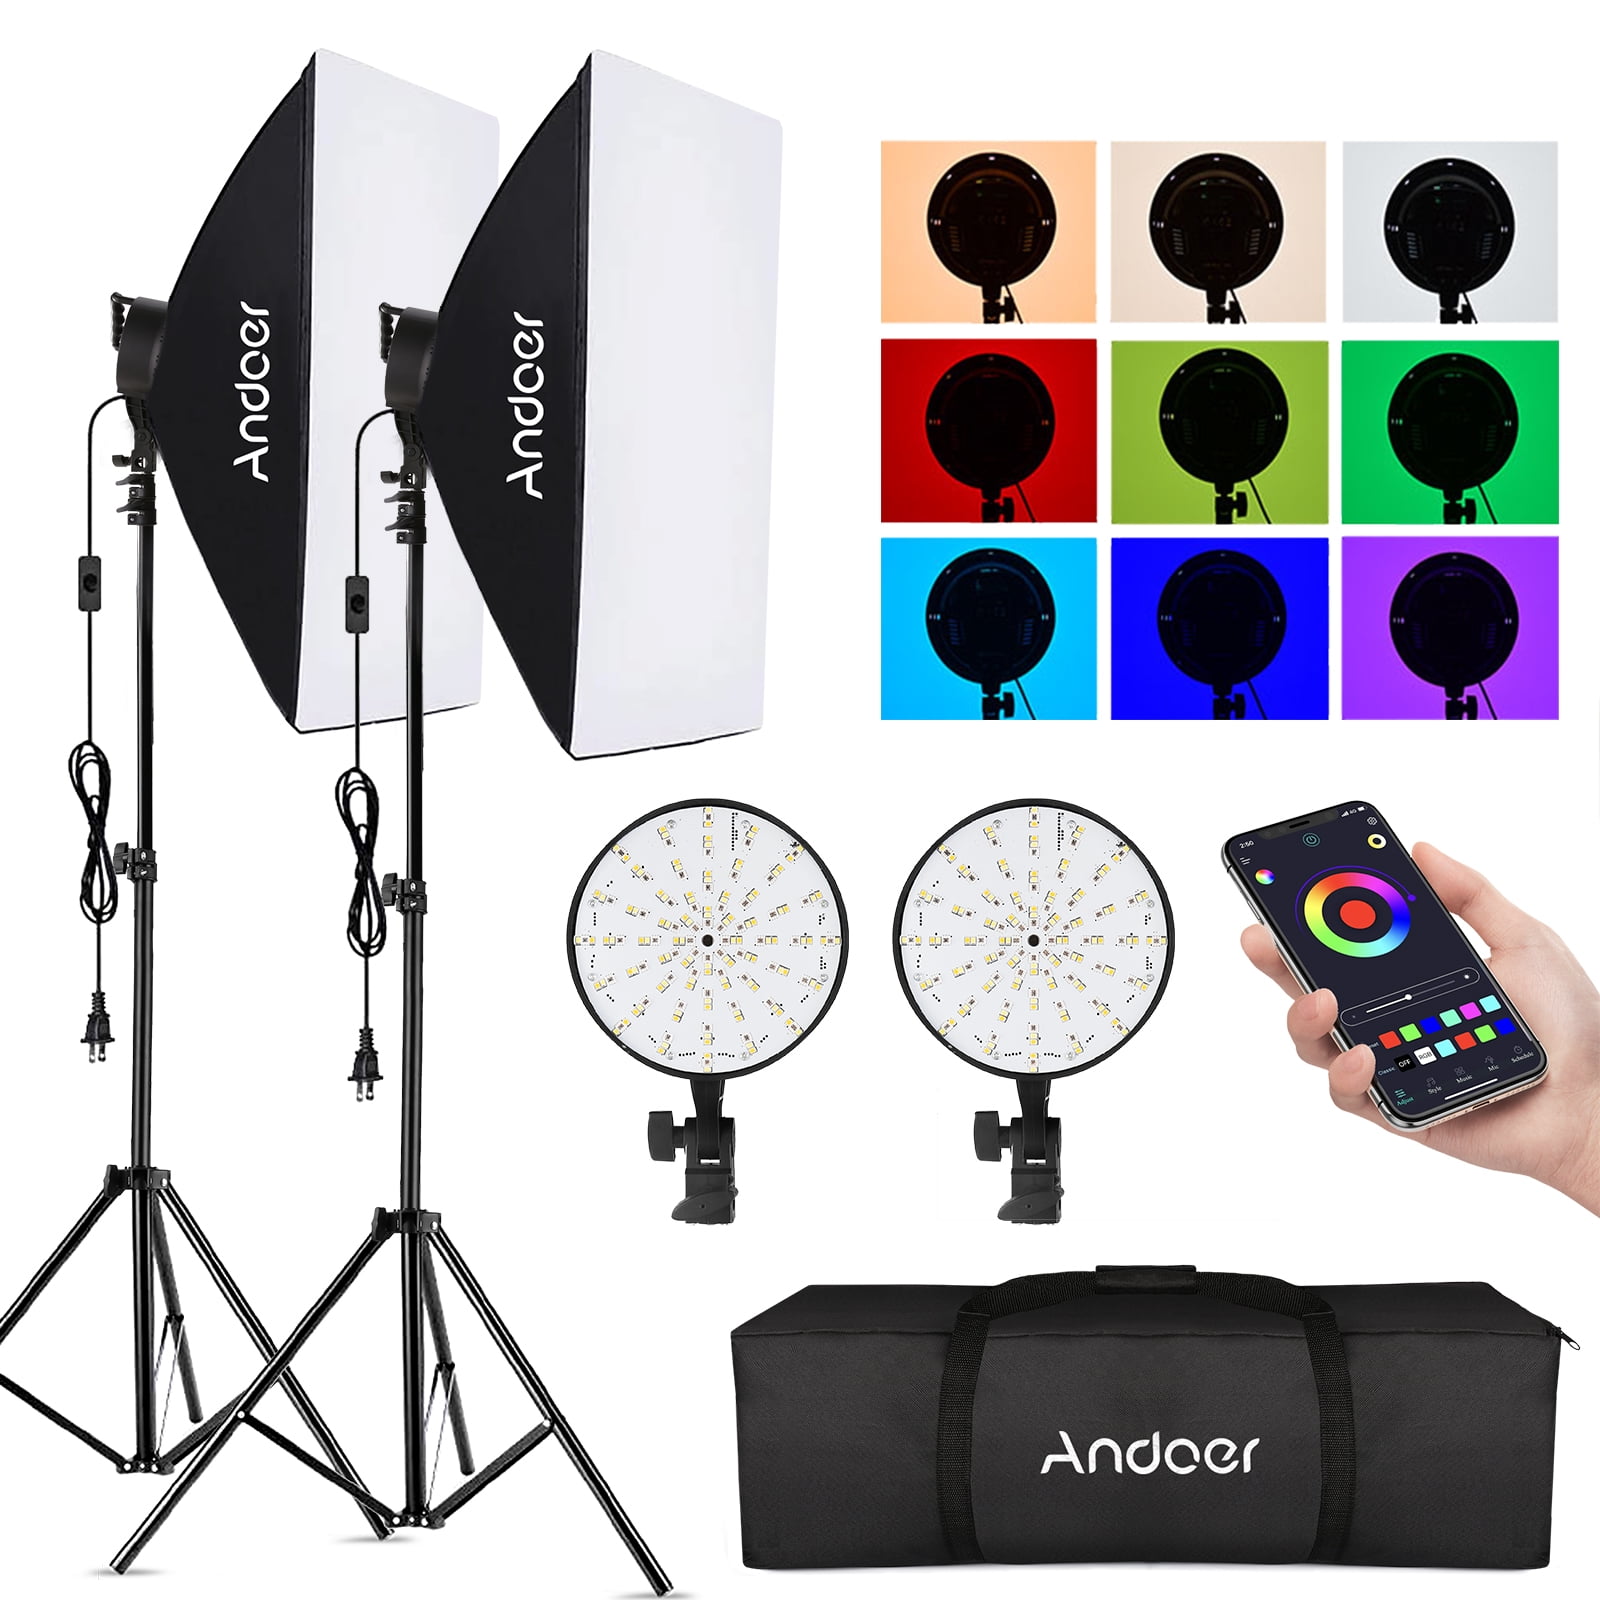 Circle Table Top Photo Studio Folding Shooting Light Tent Remote Work from Home 